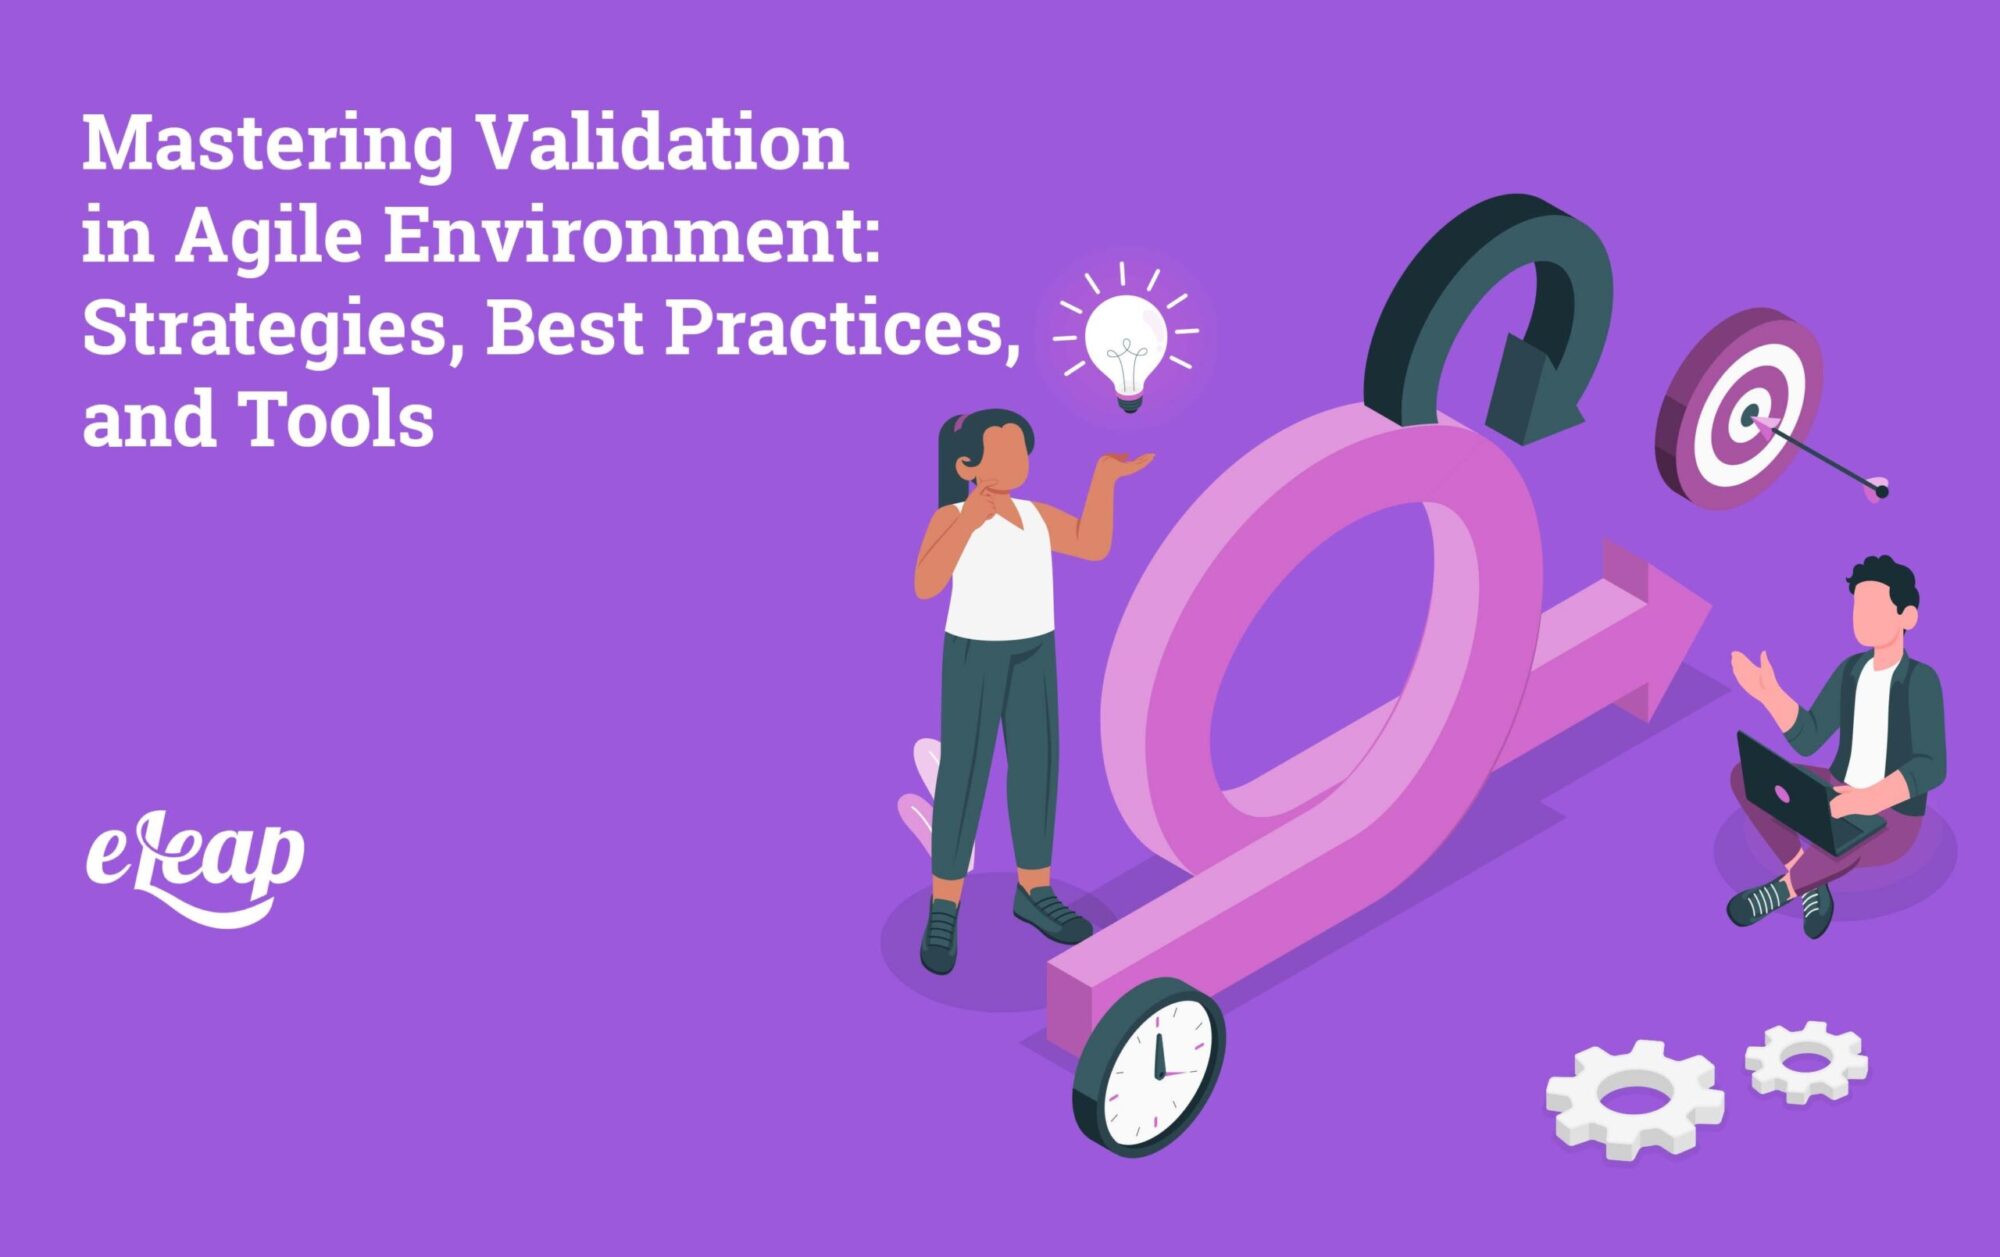 Mastering Validation in Agile Environment: Strategies, Best Practices, and Tools